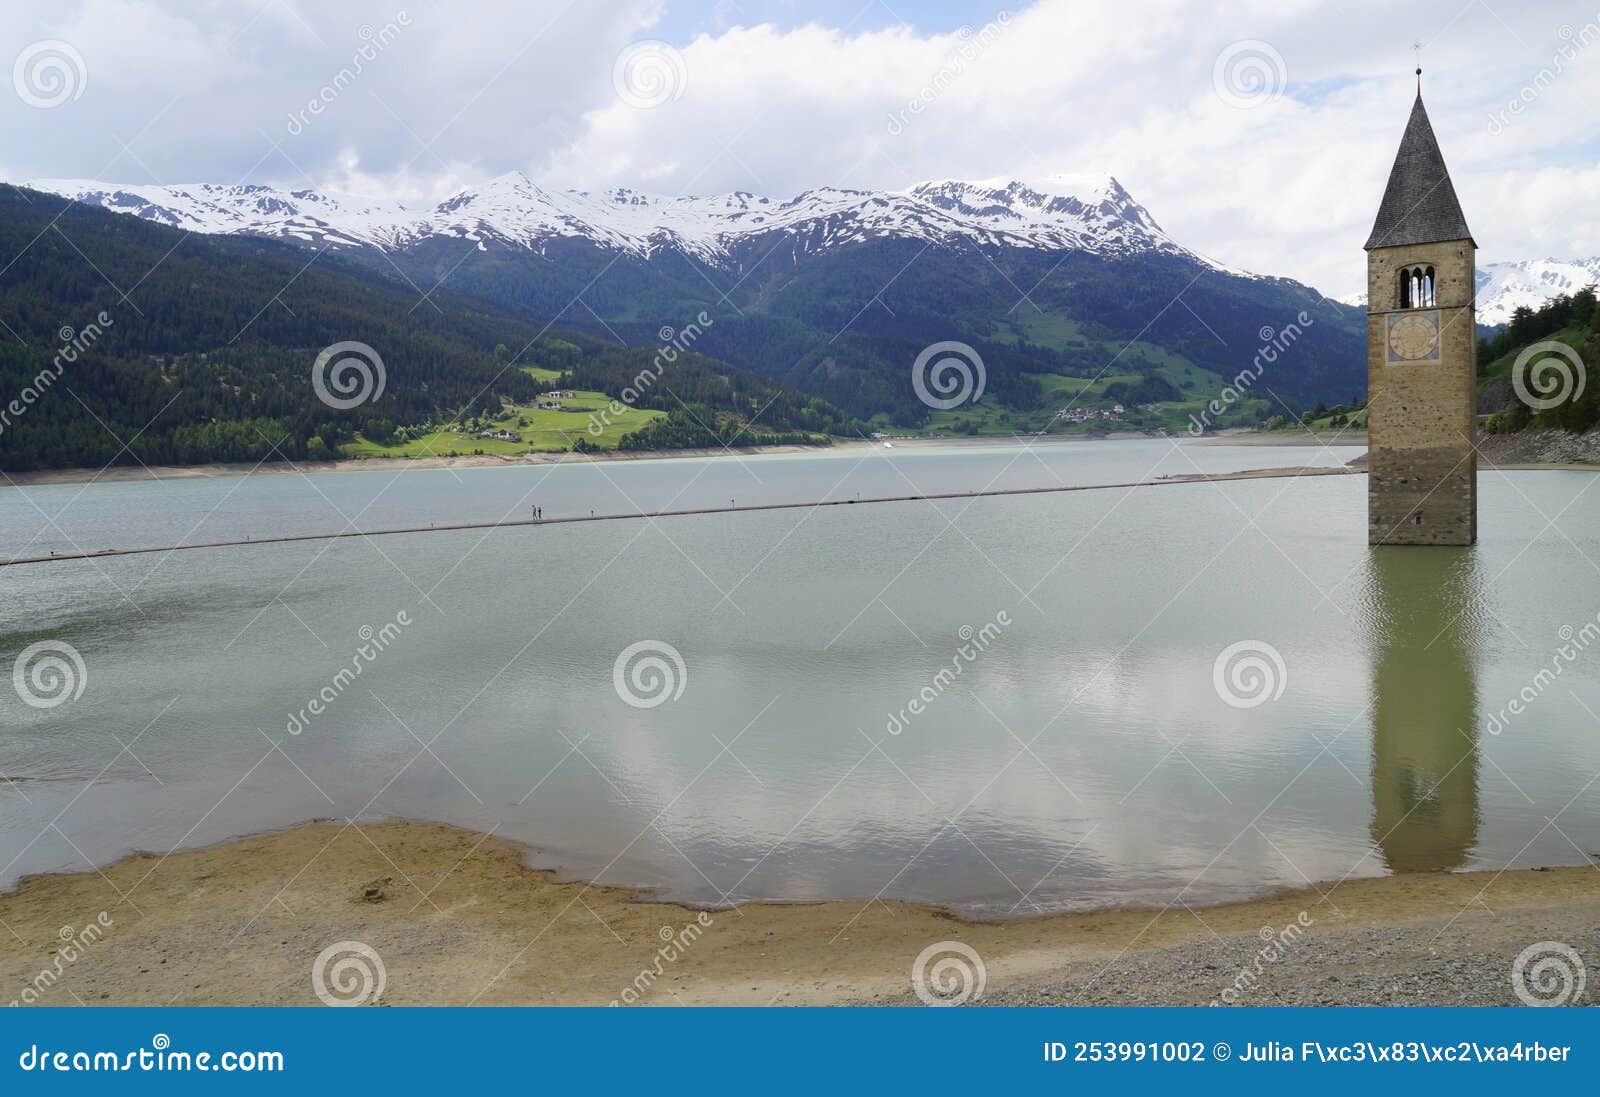 scenic view of lake resia and sunken church steeple of lago di resia in curon region (vinschgau, south tyrol, italy)